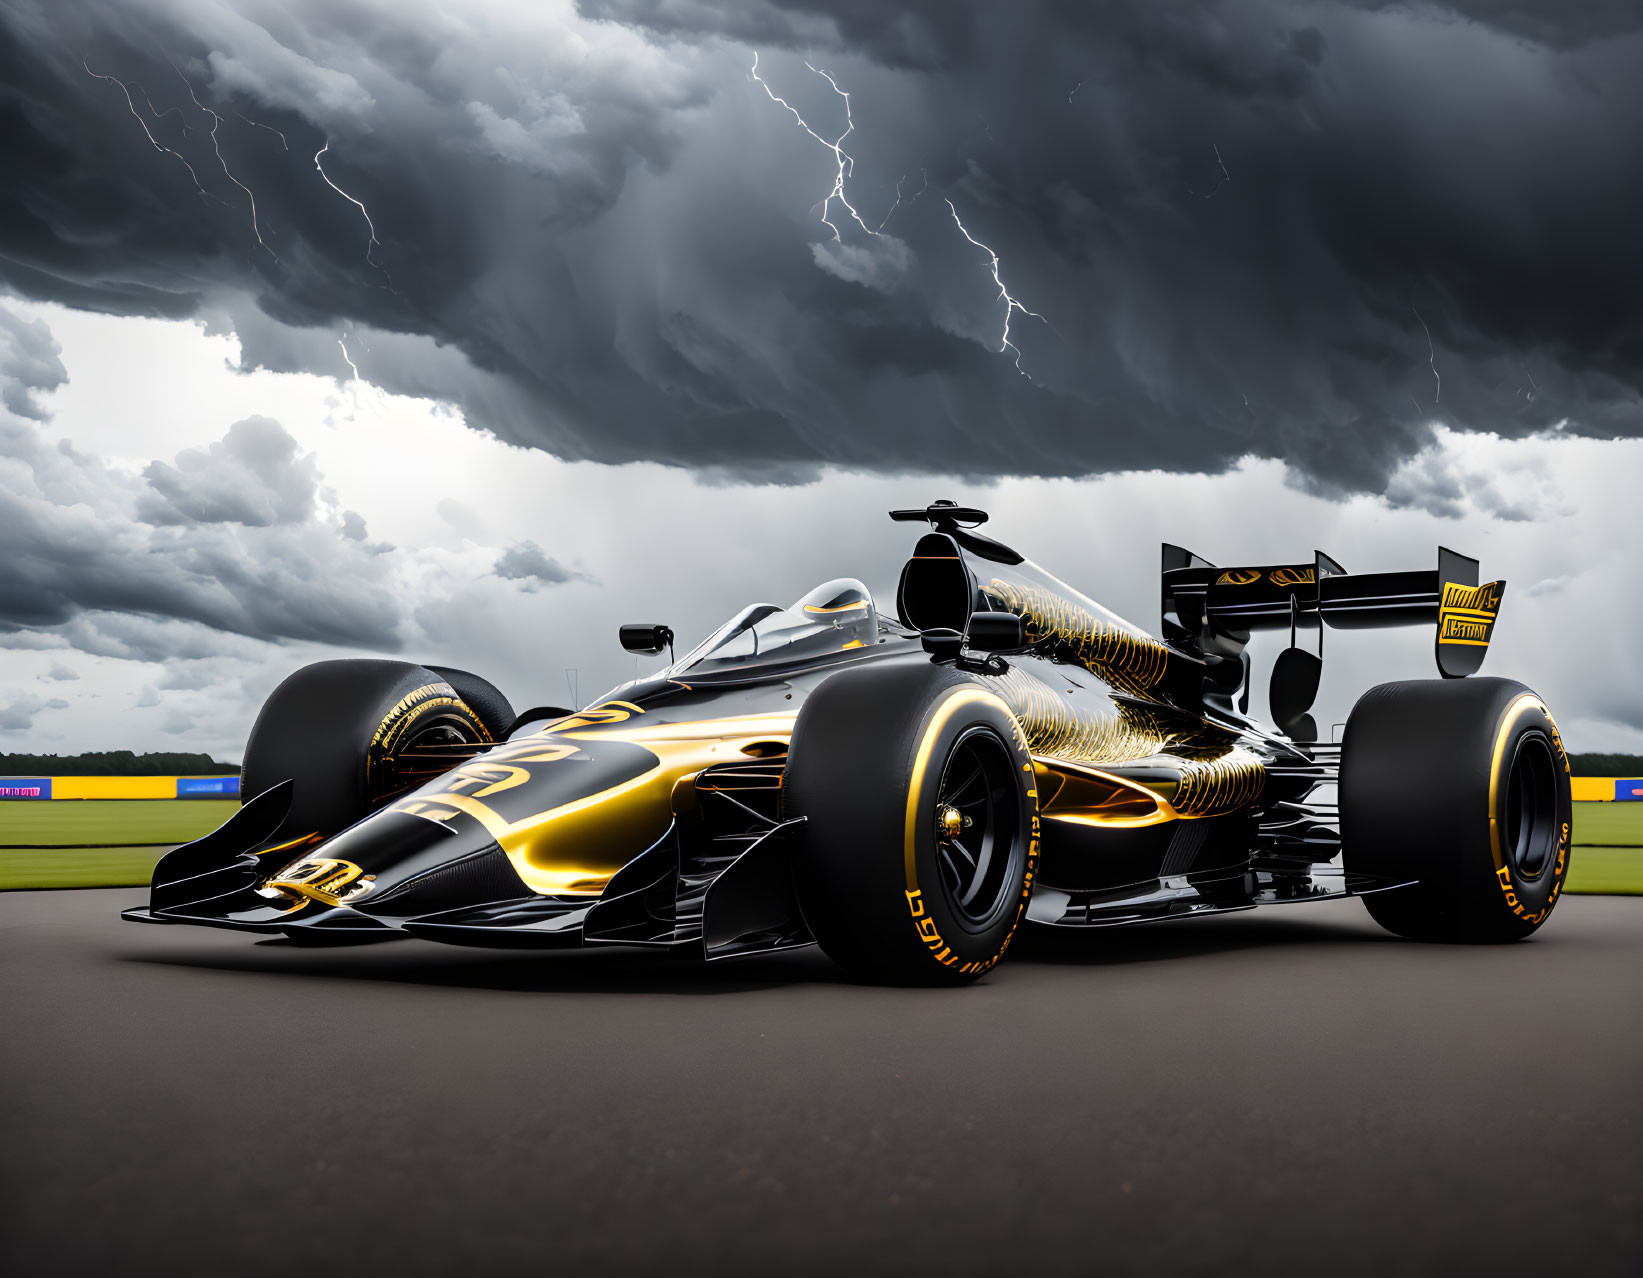 Black and Gold Formula 1 Car on Stormy Racetrack